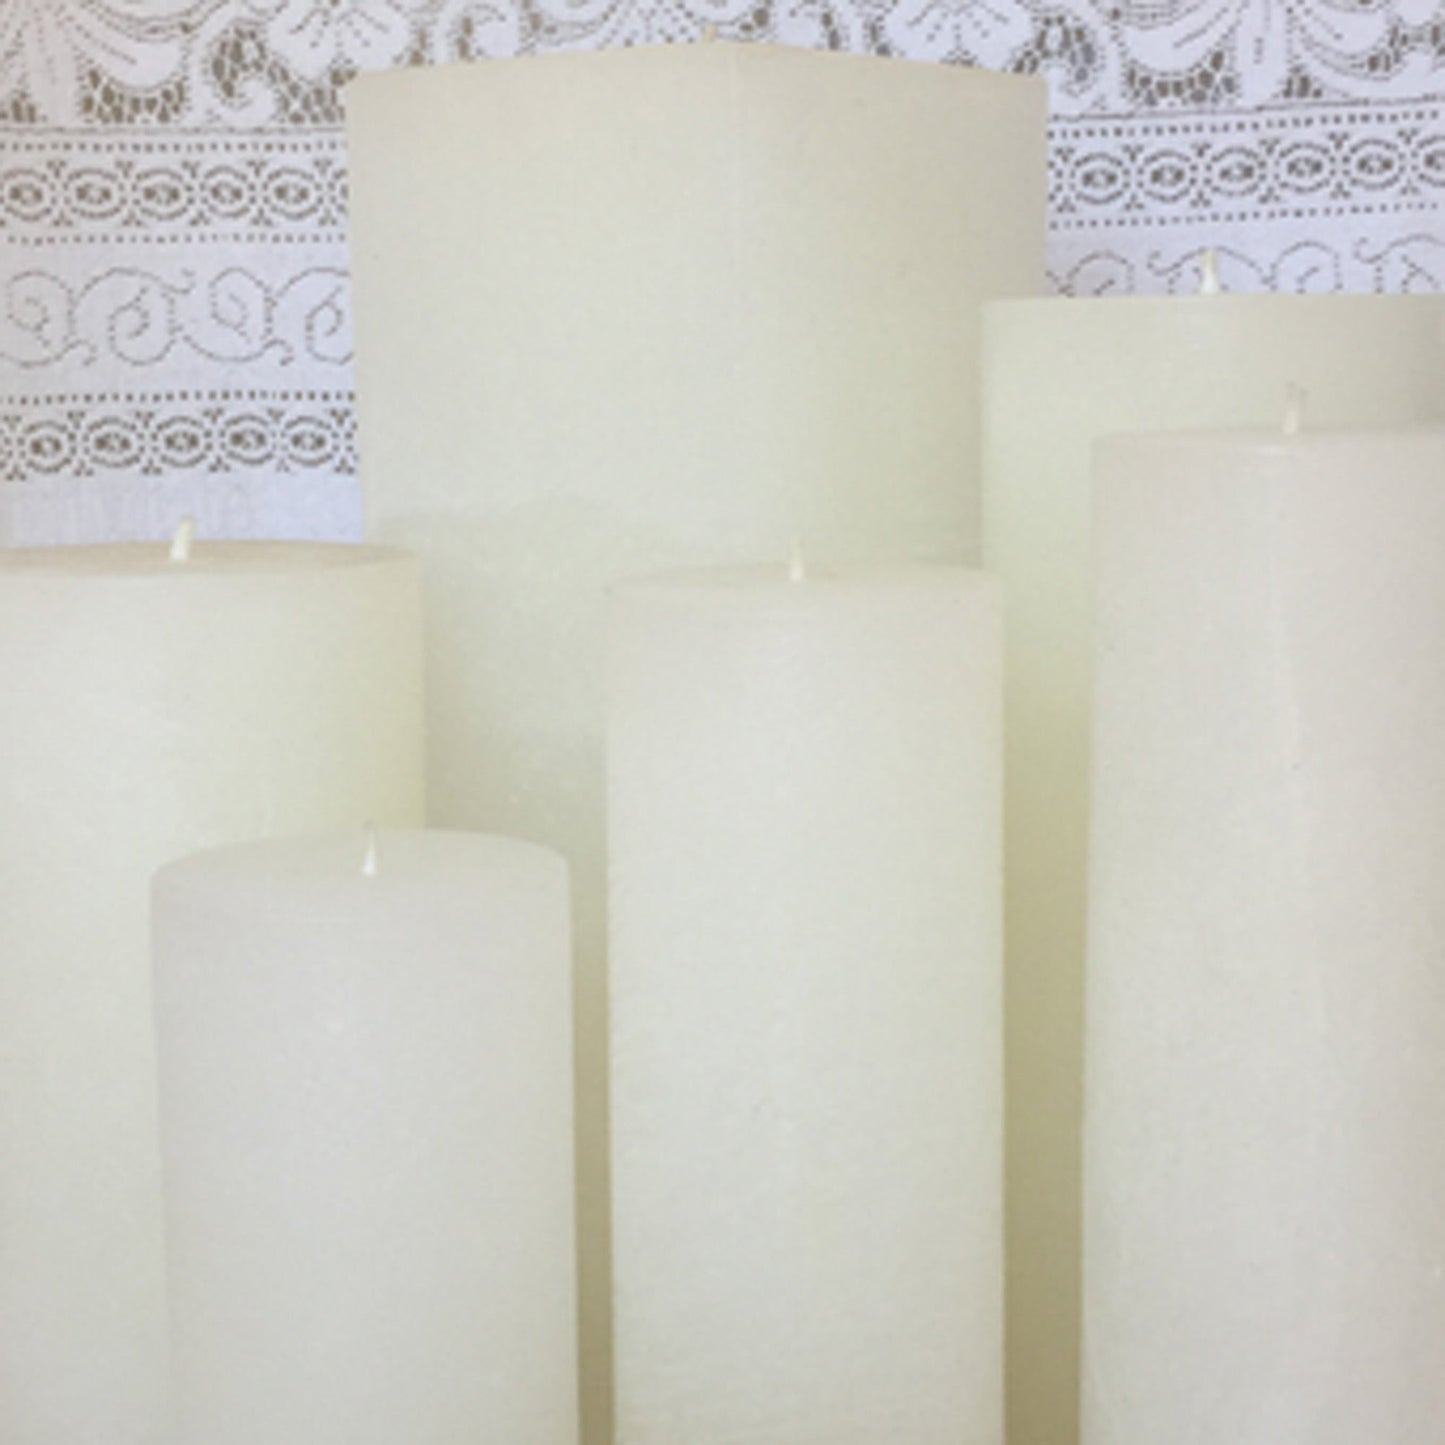 3"D x 3"H or 4"H Round Rustic Pillar candles, 30 plus colours, fragrance free - Fanny Bay Candle Company